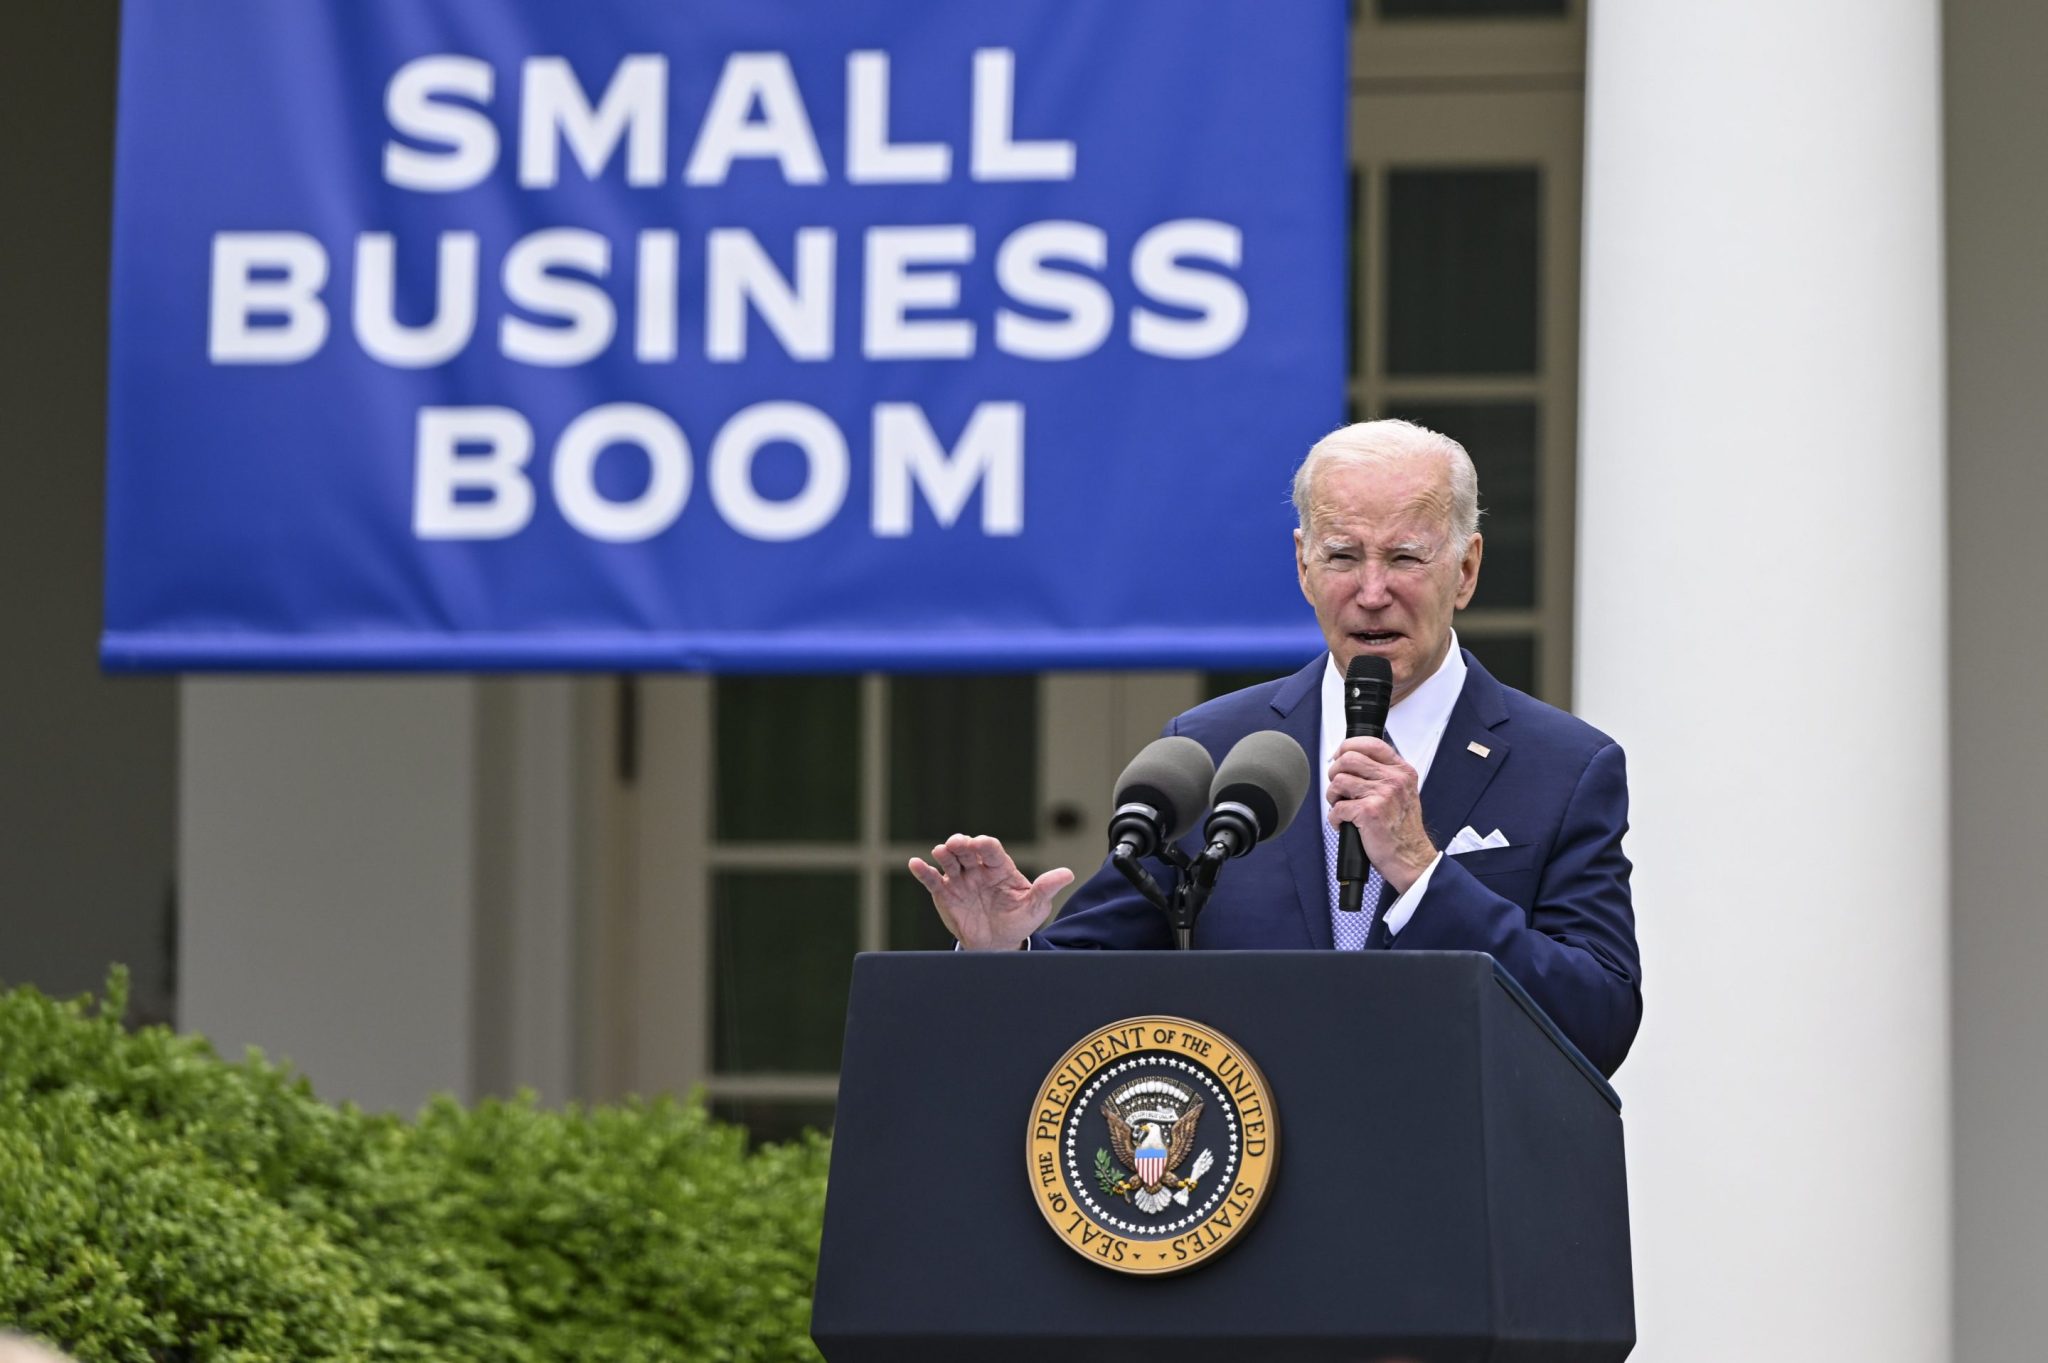 Small business optimism just hit an 11-year low. ‘Will depressed small business owners depress the economy?’